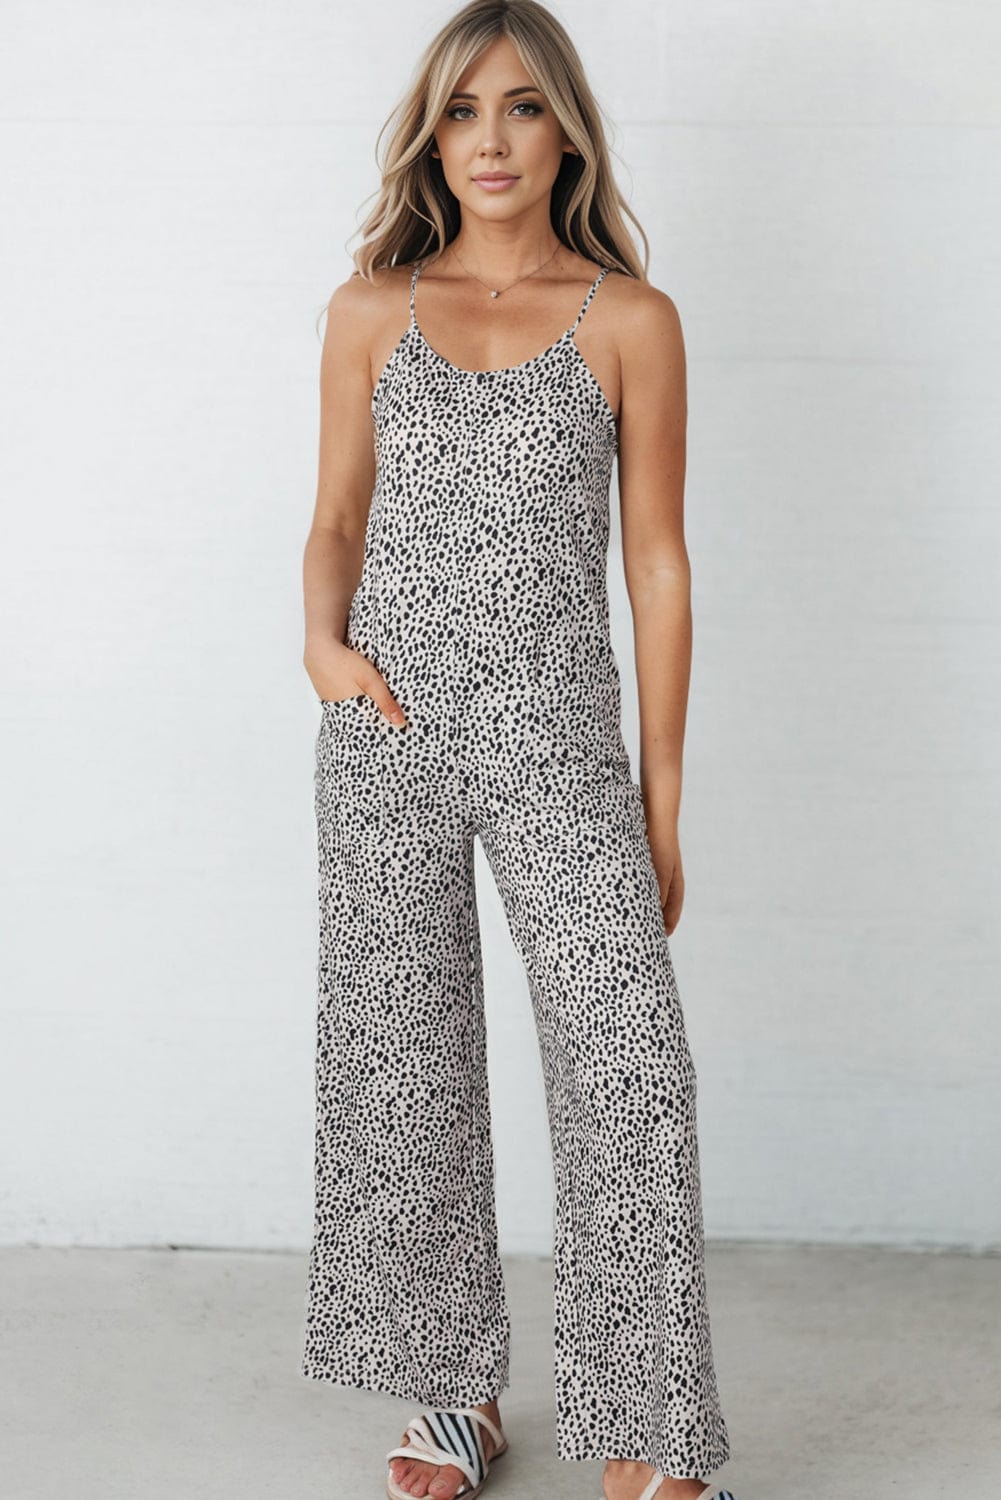 Printed Spaghetti Strap Jumpsuit with Pockets - Runway Frenzy